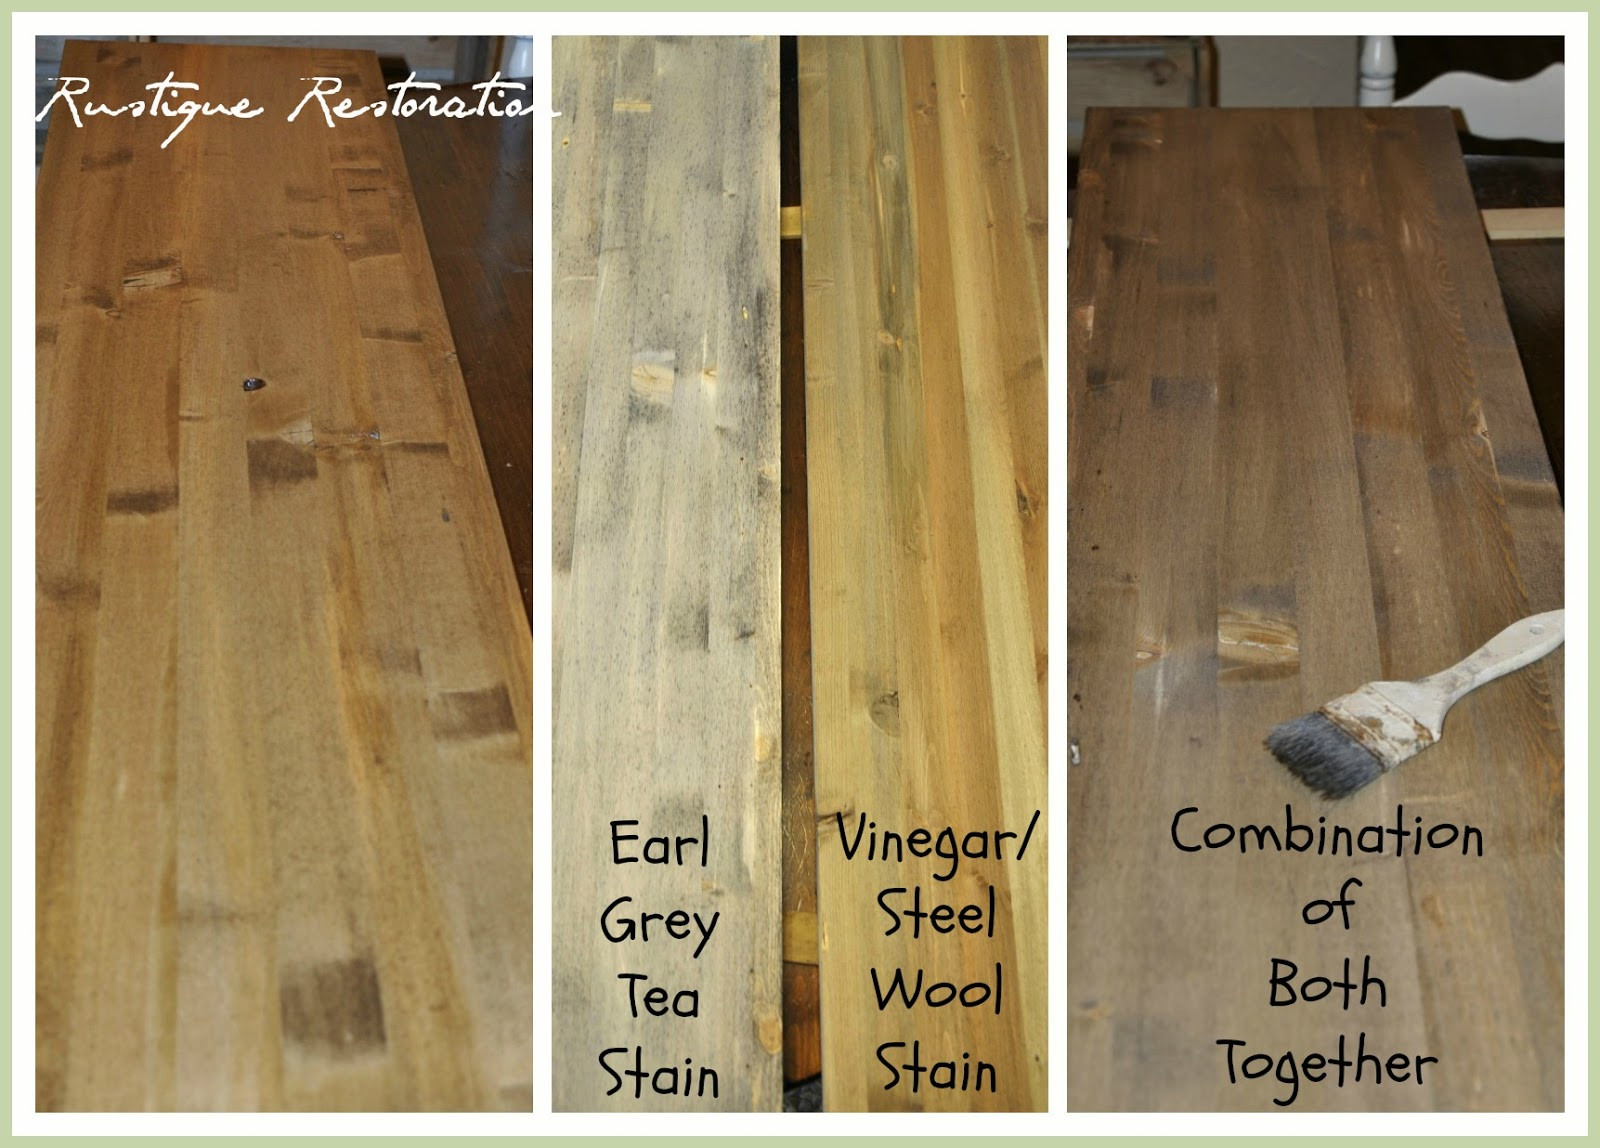 DIY Wood Stain Colors
 Rustique Restoration Homemade Stain Barn Wood Style